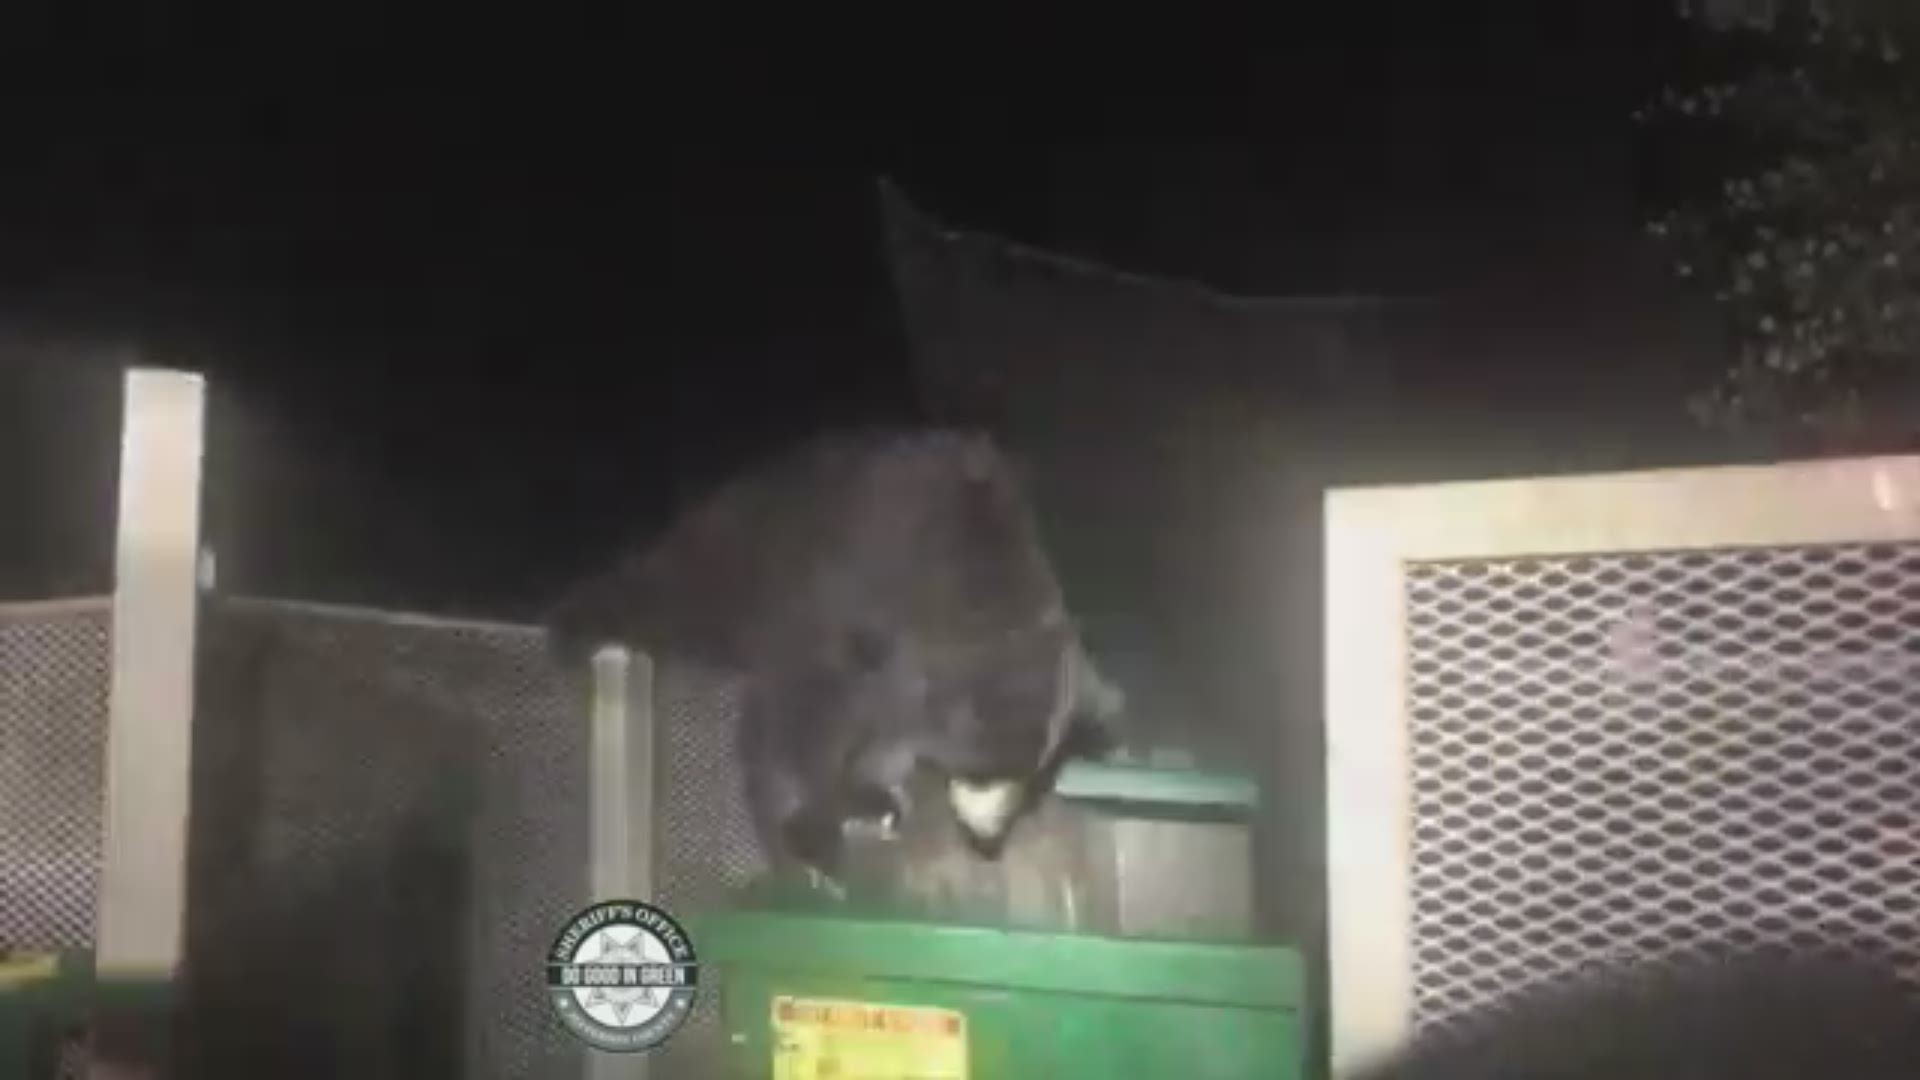 Jefferson County deputies helped three bear cubs escape from a dumpster that closed on them. One of them, nicknamed "sweet pea," needed an extra hand.